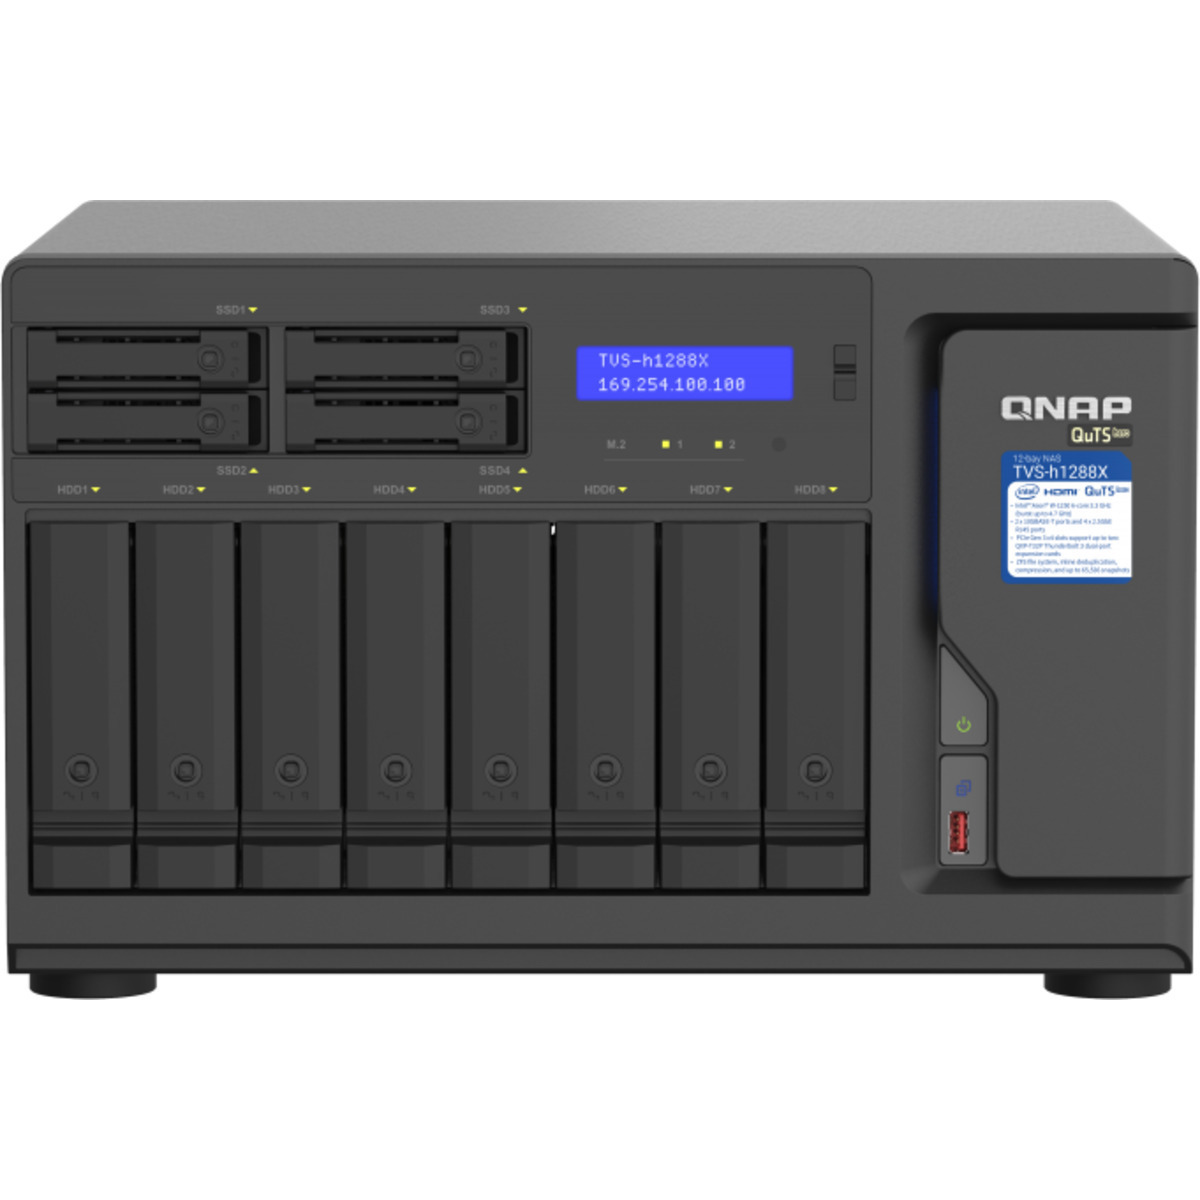 QNAP TVS-h1288X QuTS hero NAS 36tb 8+4-Bay Desktop Multimedia / Power User / Business NAS - Network Attached Storage Device 6x6tb Western Digital Red Pro WD6005FFBX 3.5 7200rpm SATA 6Gb/s HDD NAS Class Drives Installed - Burn-In Tested TVS-h1288X QuTS hero NAS